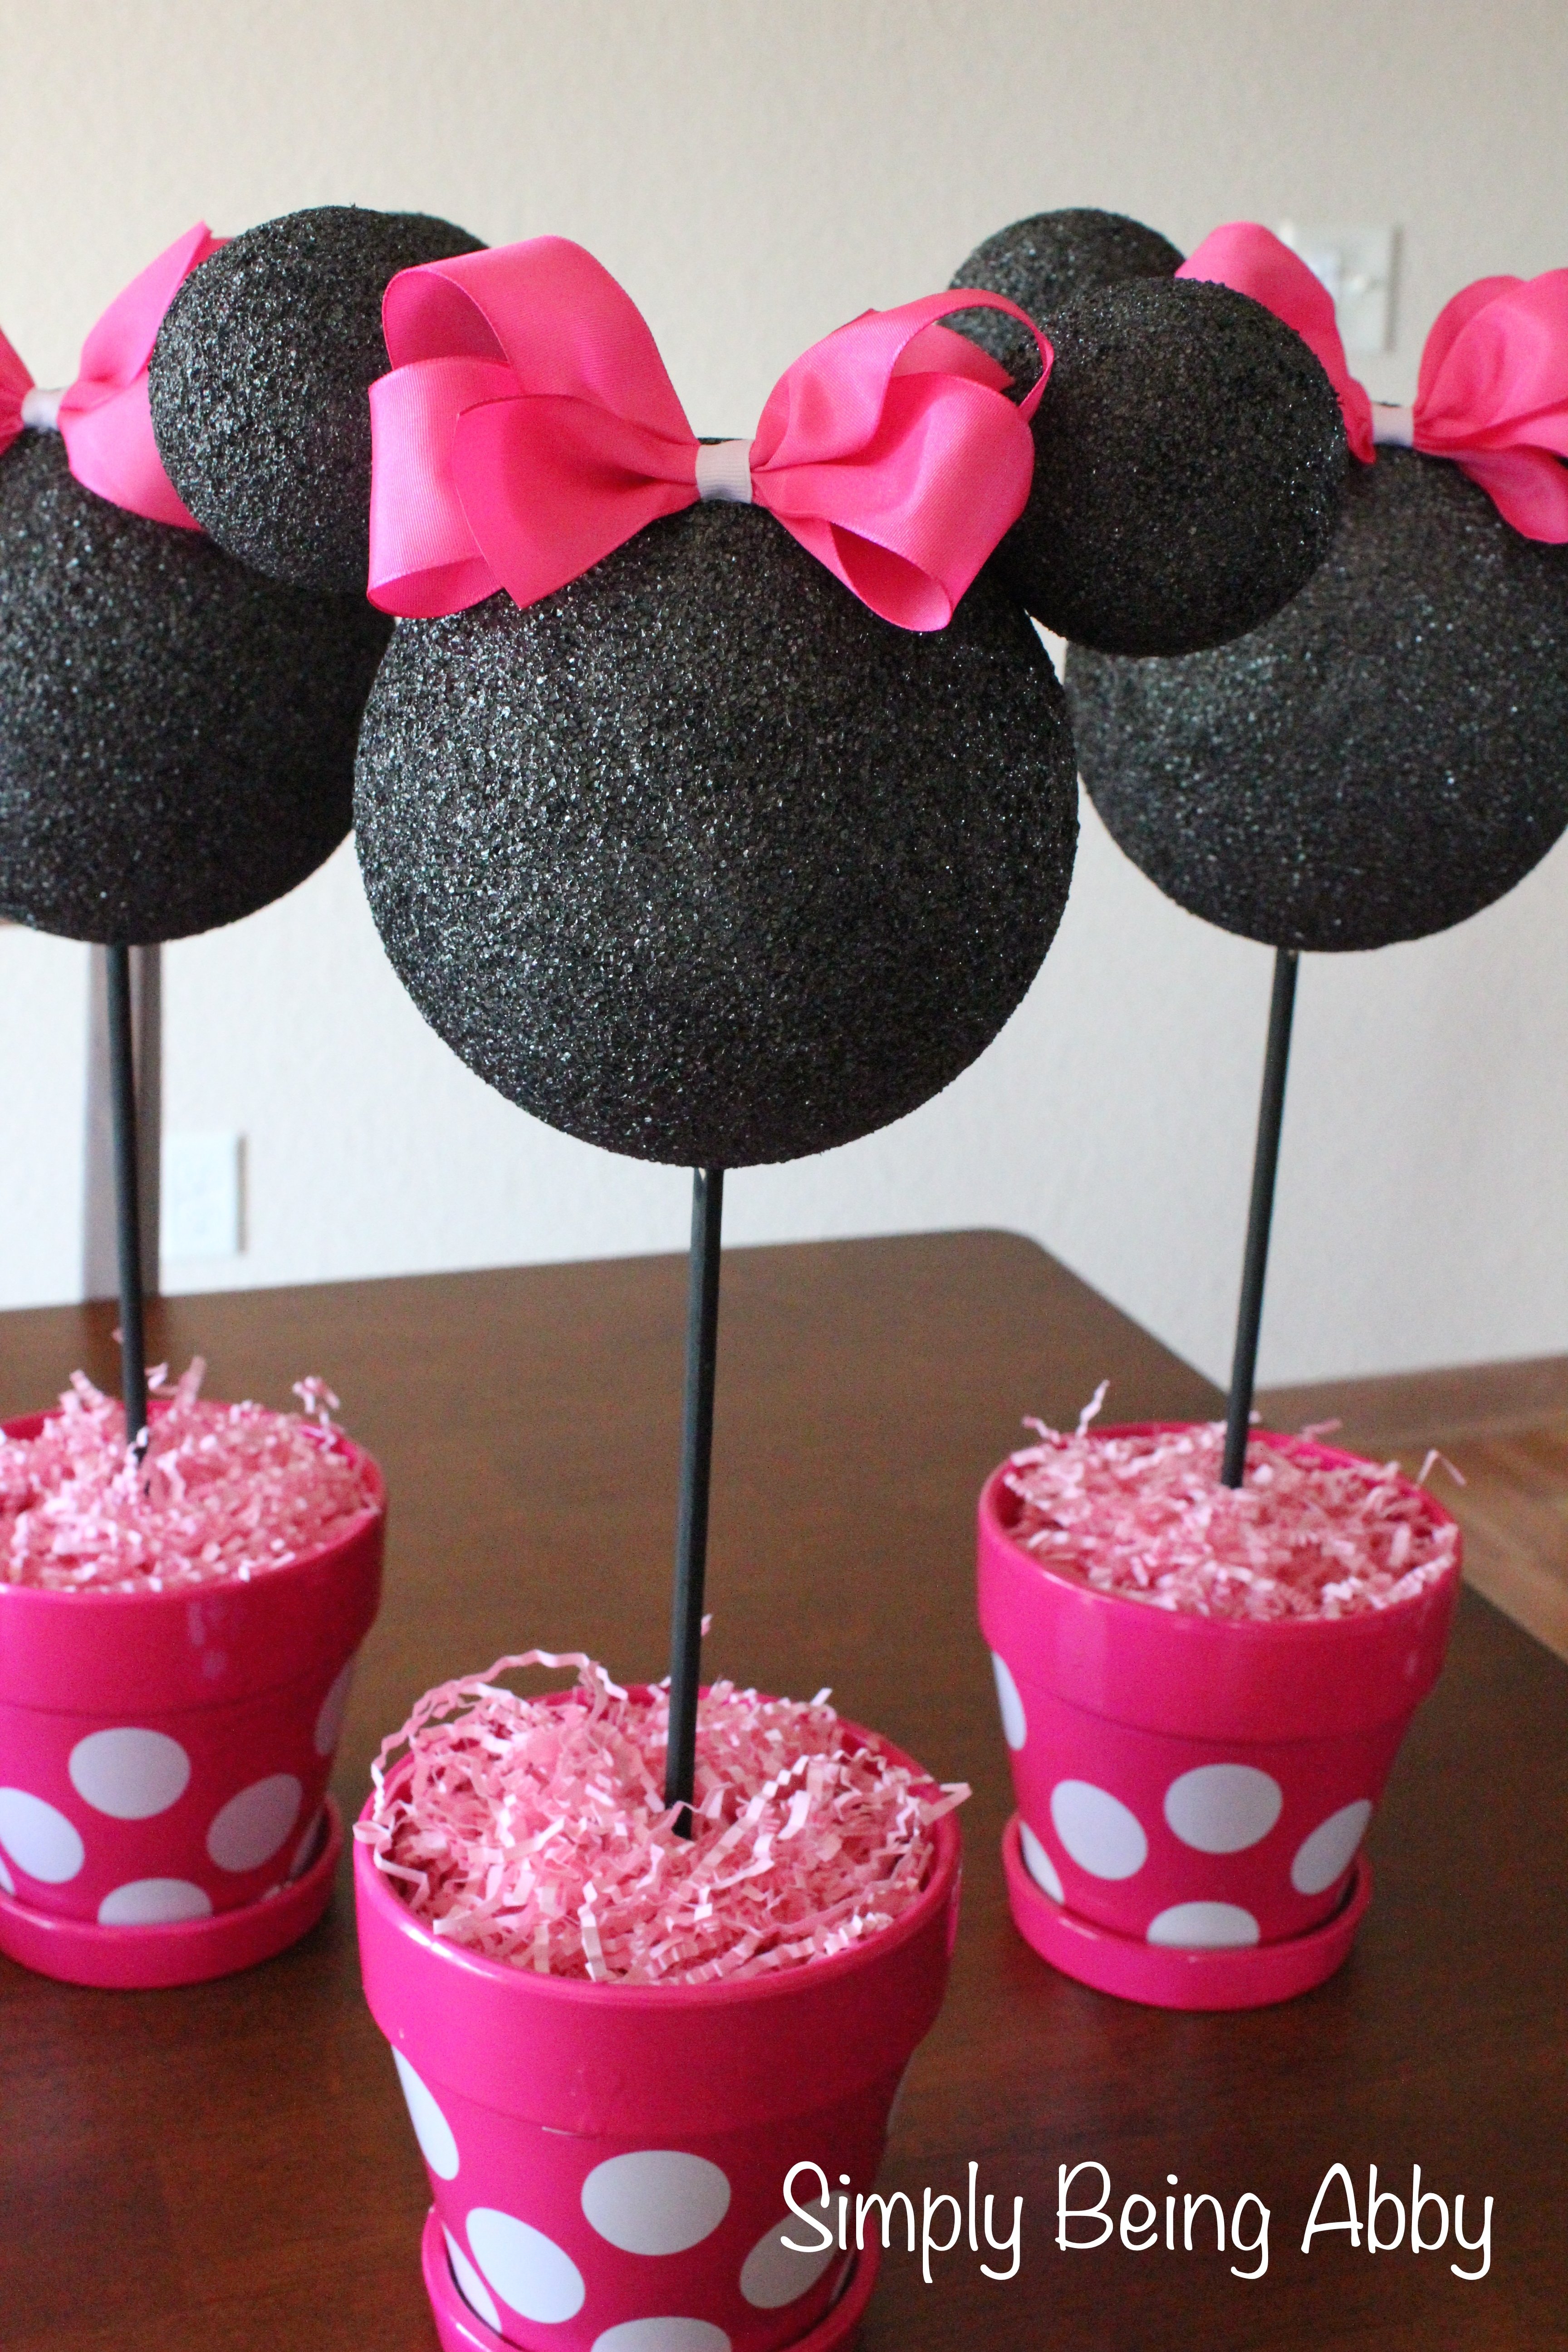 10 Famous Minnie Mouse Party Ideas Homemade minnie mouse centerpiece decorations simply being abby 1 2023